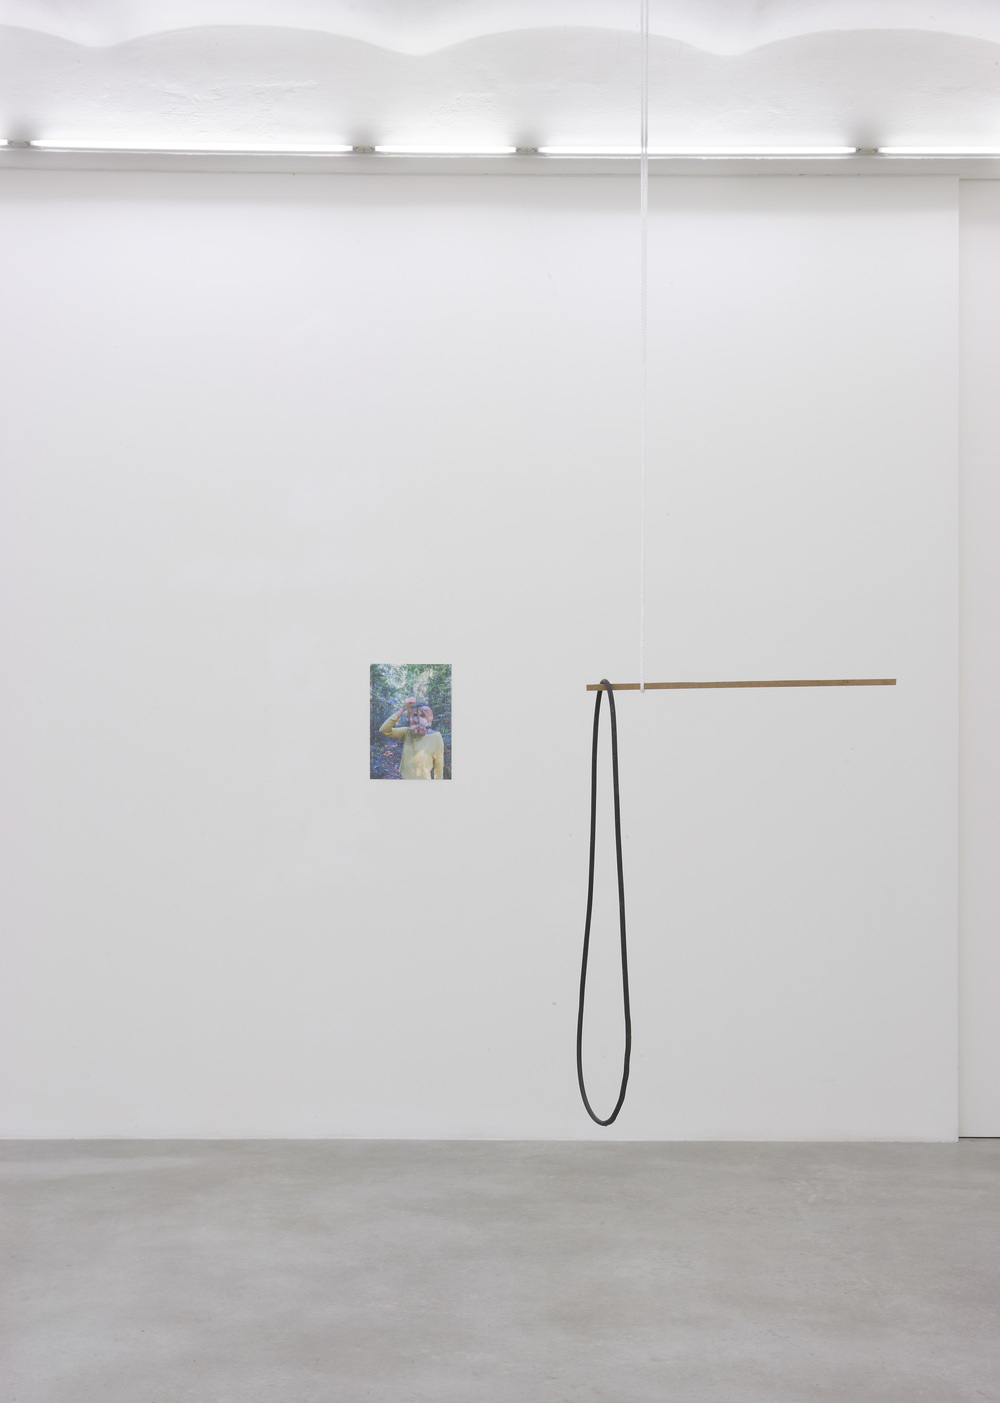 Installation view, Esther Kläs, Our Reality (more), SpazioA